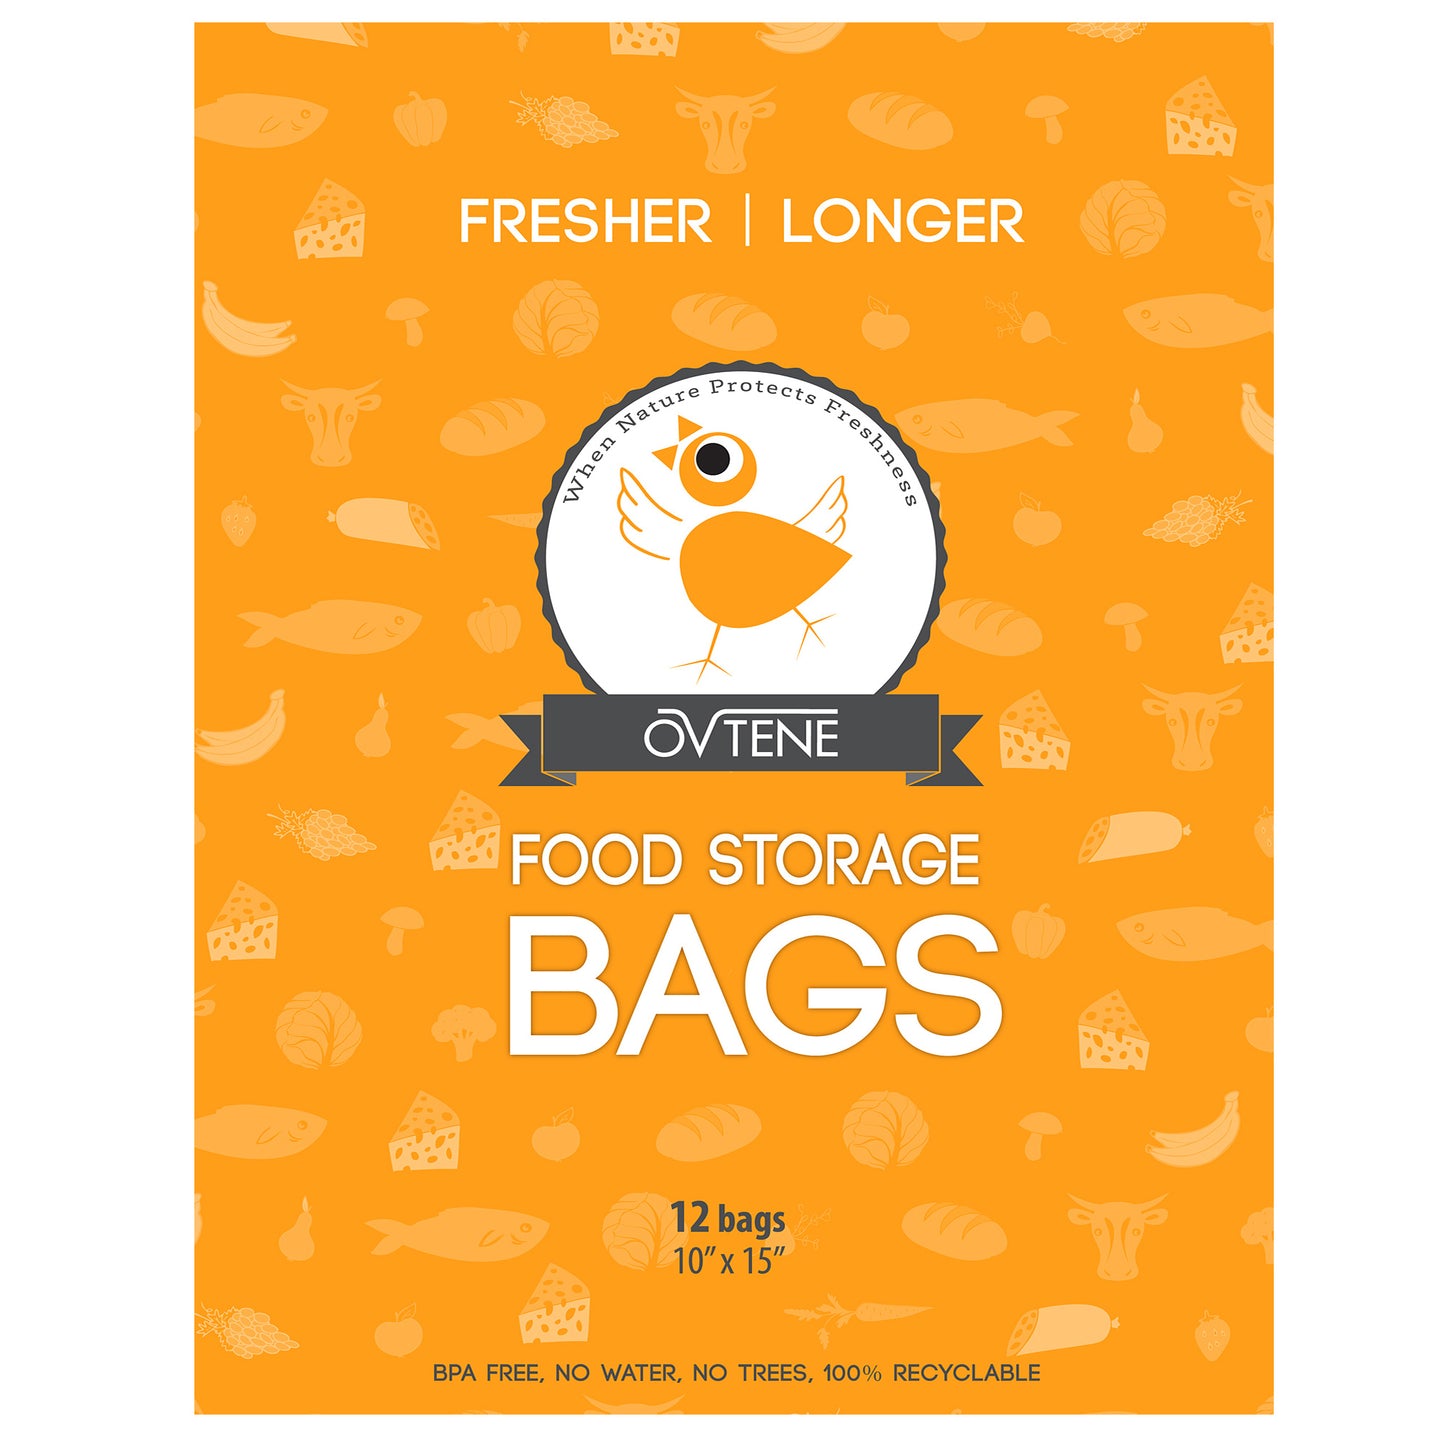 OVTENE Food Storage Bags for Cheese, Meat, and Produce - Keeps Food Fresher Longer (12 Large Bags 10”x15”)